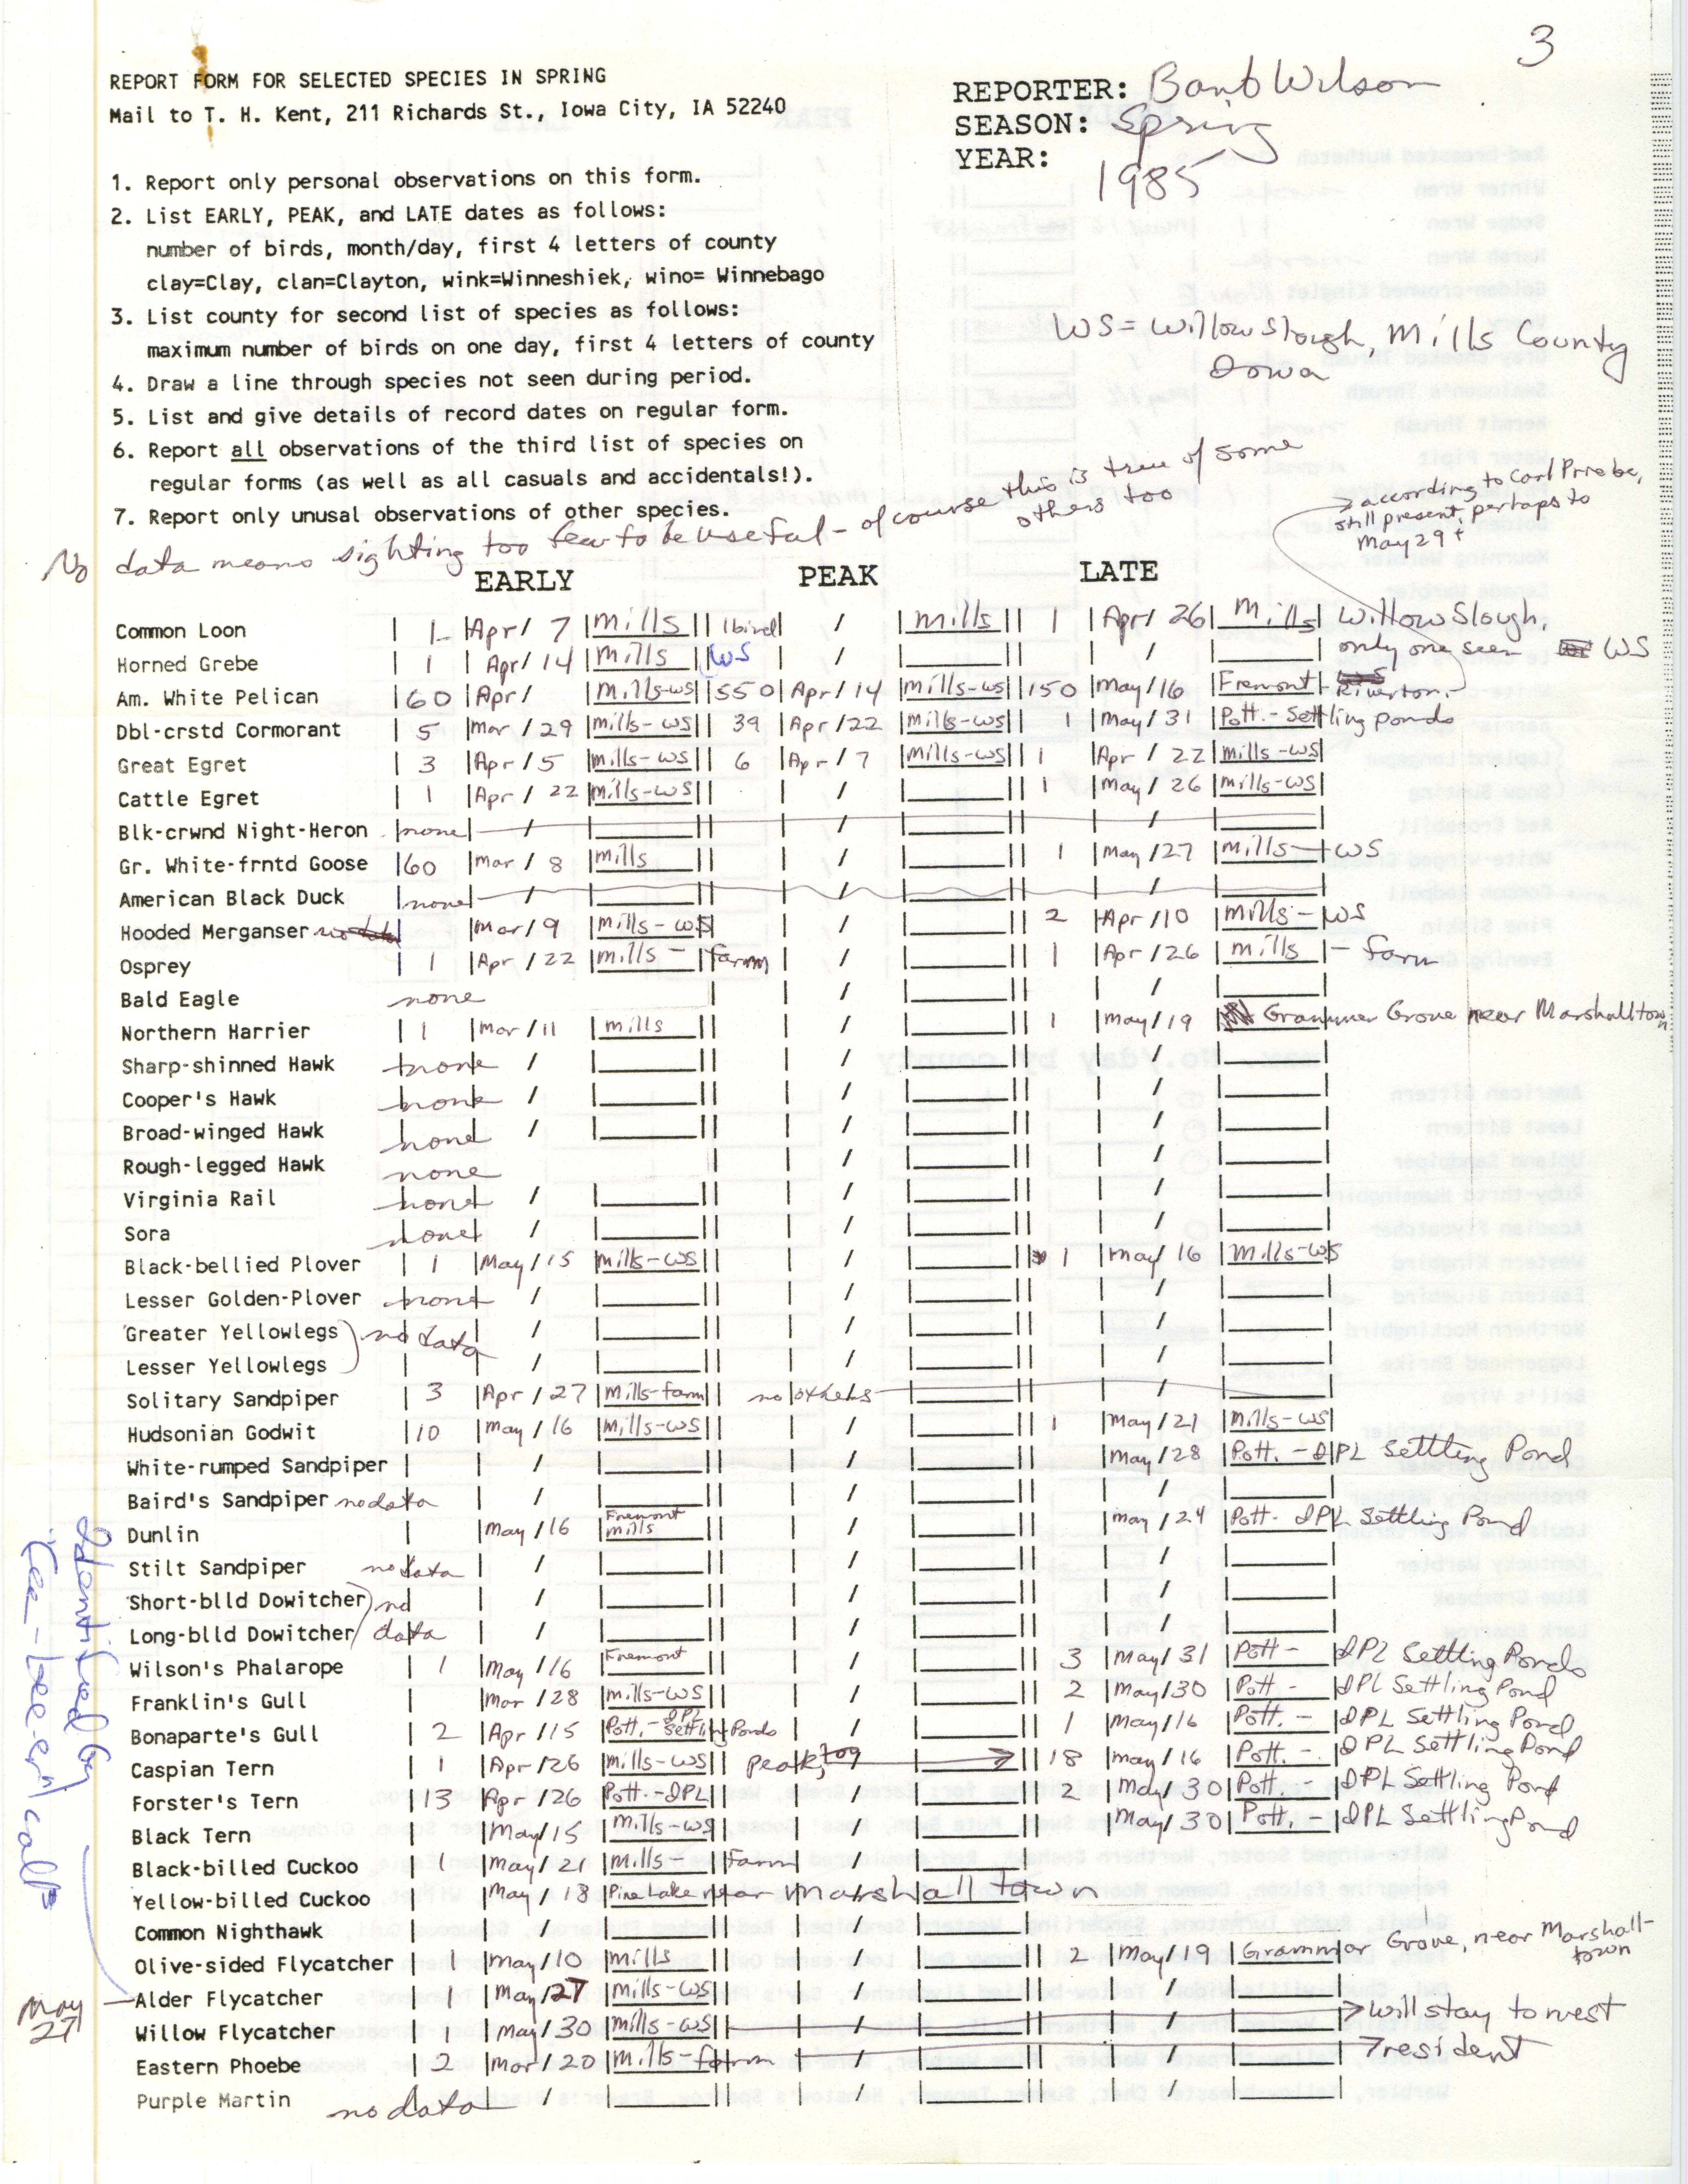 Report form for selected species in spring, contributed by Barbara L. Wilson, spring 1985